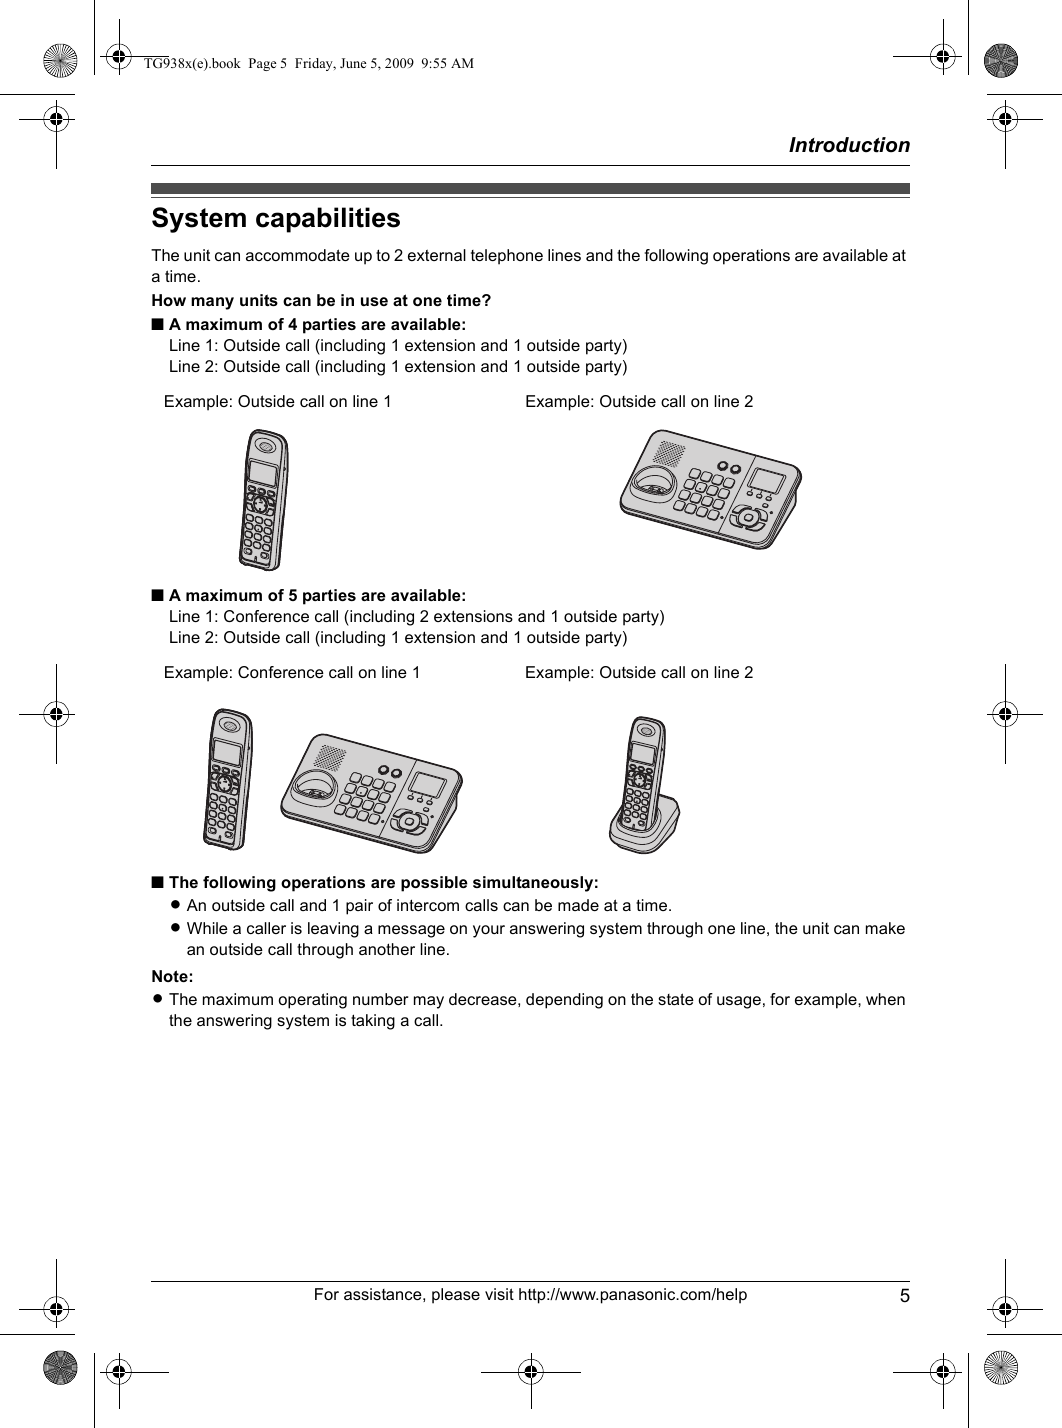 Introduction5For assistance, please visit http://www.panasonic.com/helpSystem capabilitiesThe unit can accommodate up to 2 external telephone lines and the following operations are available at a time.How many units can be in use at one time?■A maximum of 4 parties are available:Line 1: Outside call (including 1 extension and 1 outside party)Line 2: Outside call (including 1 extension and 1 outside party)■A maximum of 5 parties are available:Line 1: Conference call (including 2 extensions and 1 outside party)Line 2: Outside call (including 1 extension and 1 outside party)■The following operations are possible simultaneously:LAn outside call and 1 pair of intercom calls can be made at a time.LWhile a caller is leaving a message on your answering system through one line, the unit can make an outside call through another line.Note:LThe maximum operating number may decrease, depending on the state of usage, for example, when the answering system is taking a call.Example: Outside call on line 1 Example: Outside call on line 2Example: Conference call on line 1 Example: Outside call on line 2TG938x(e).book  Page 5  Friday, June 5, 2009  9:55 AM